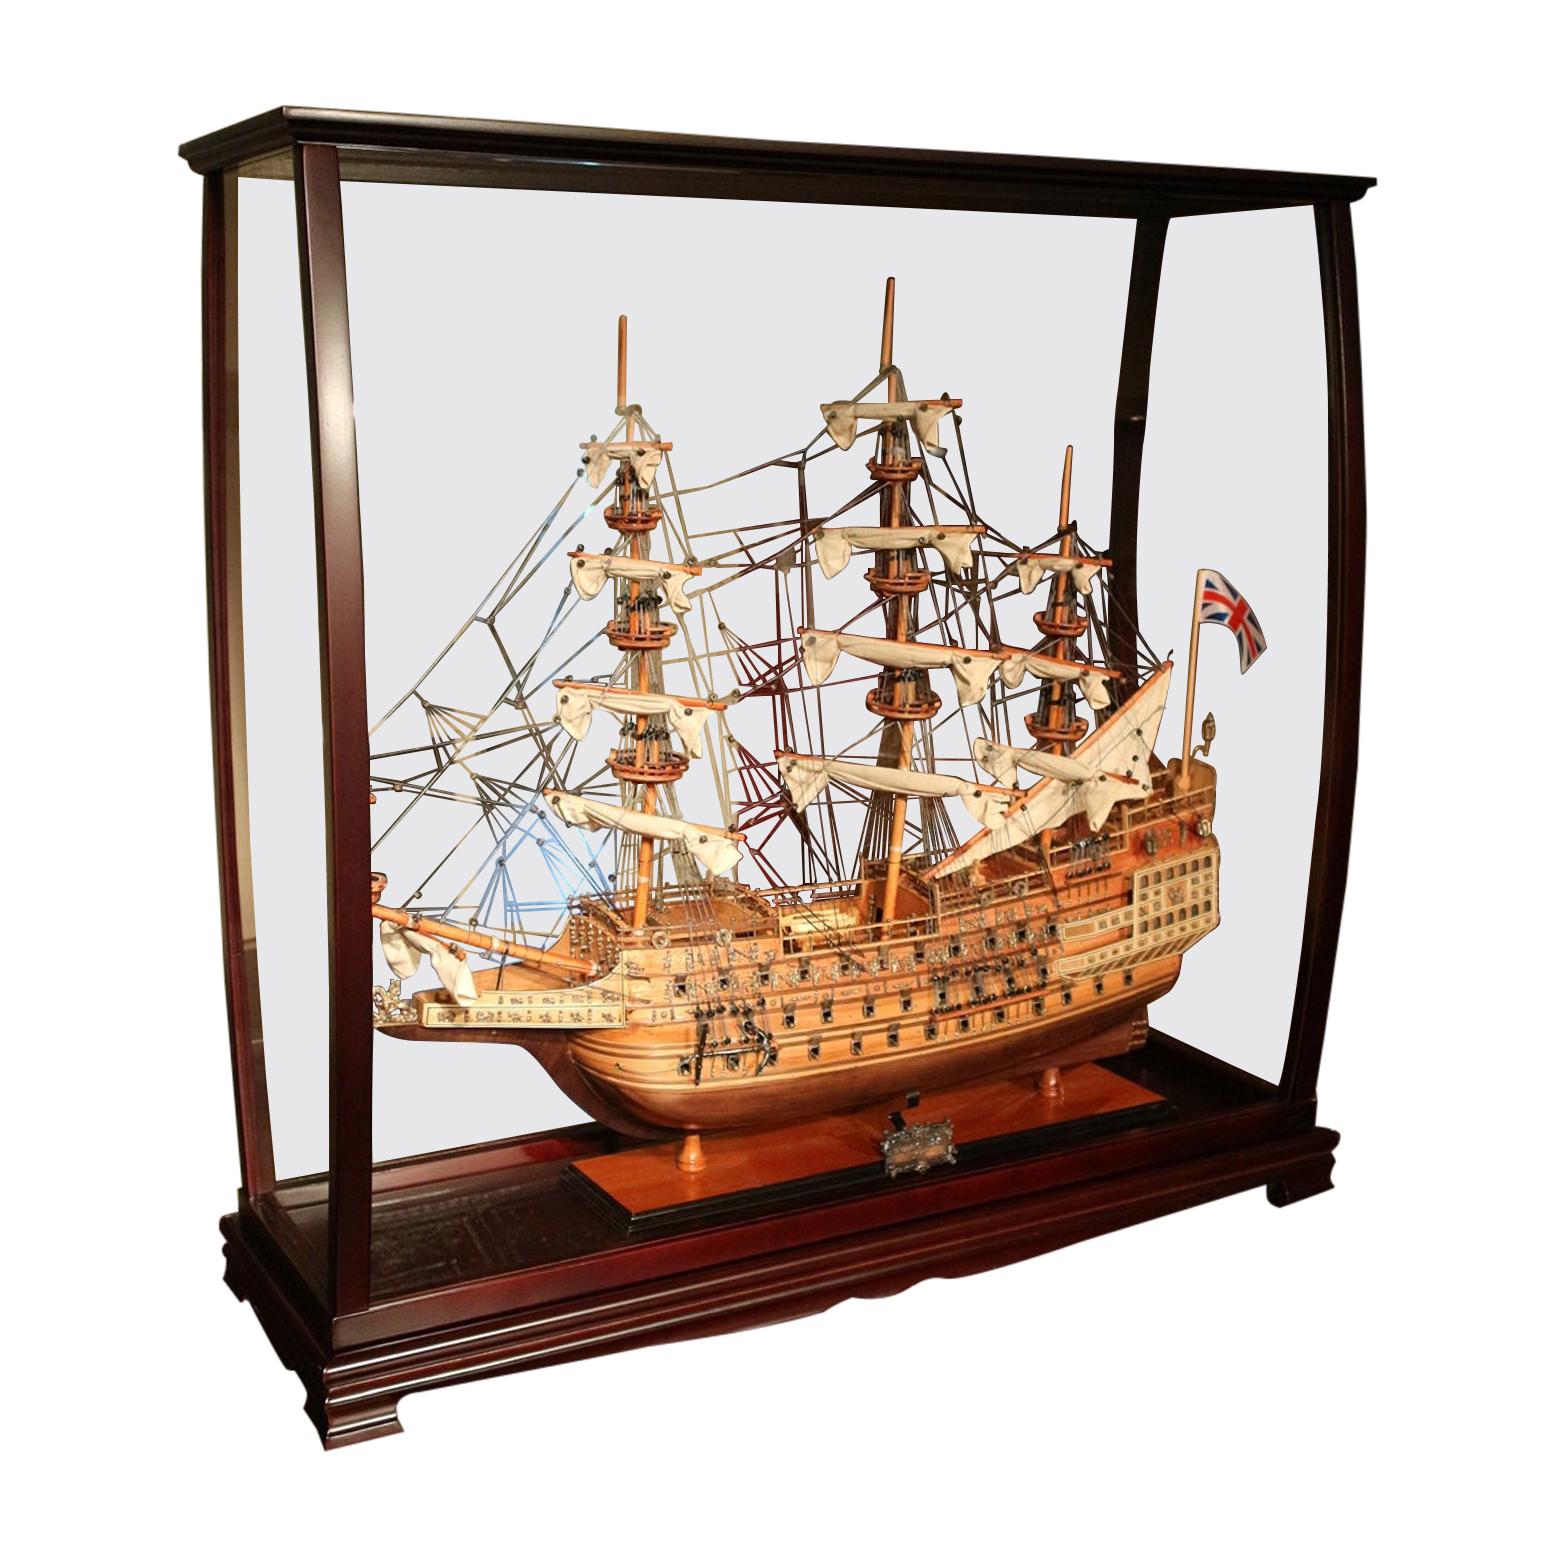 Museum-Quality, Fully Assembled Replica of H.M.S. Sovereign of the Seas For Sale